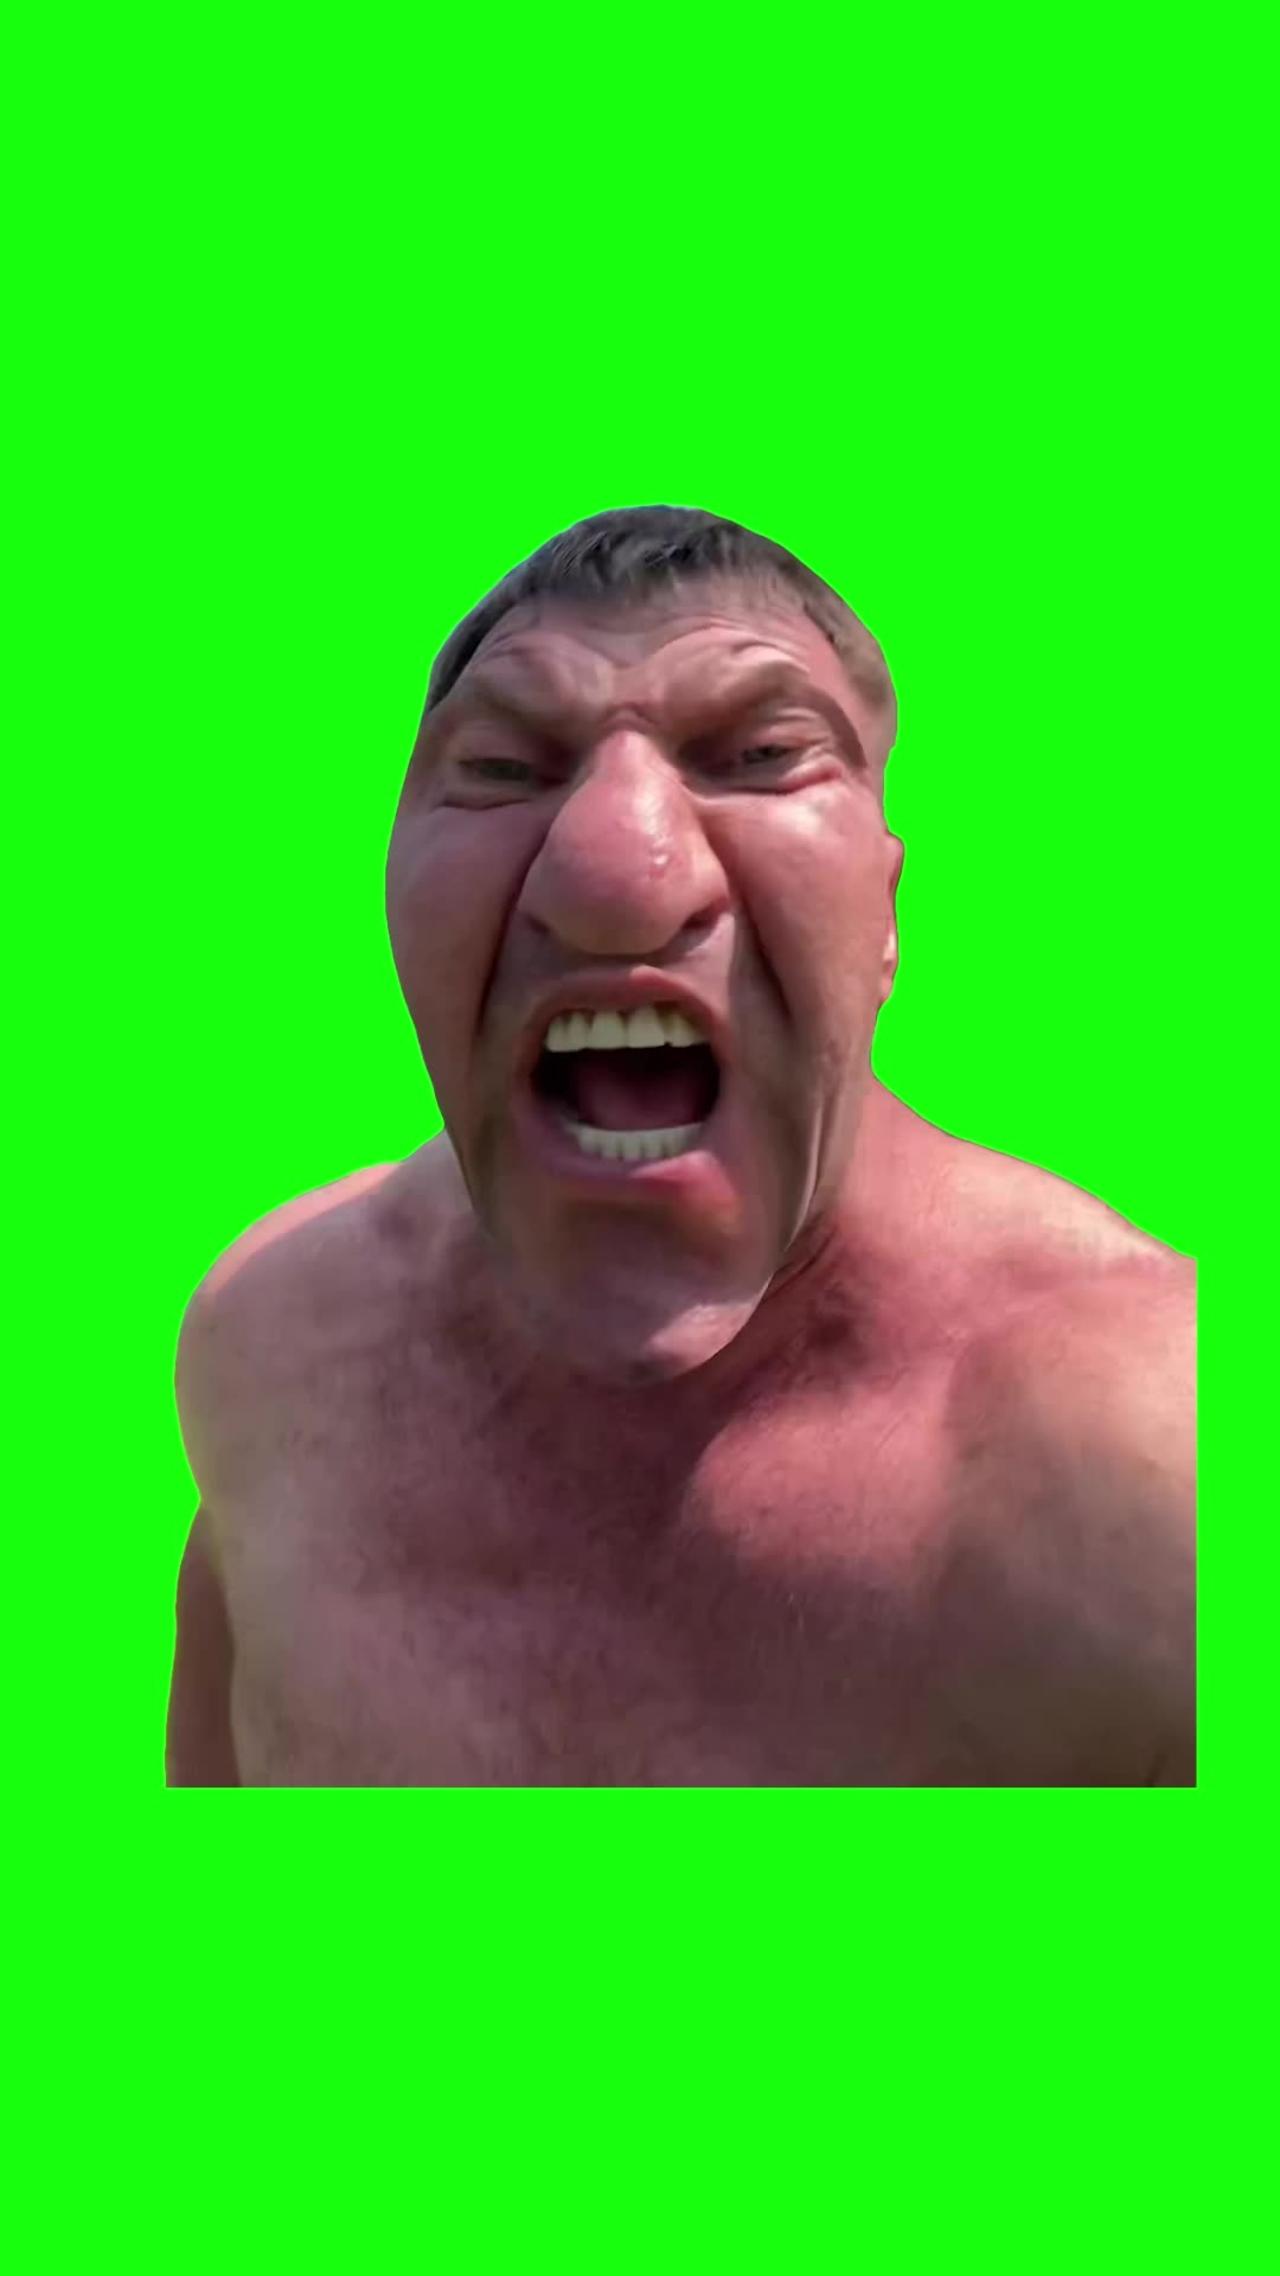 Angry Russian Bodybuilder | Green Screen